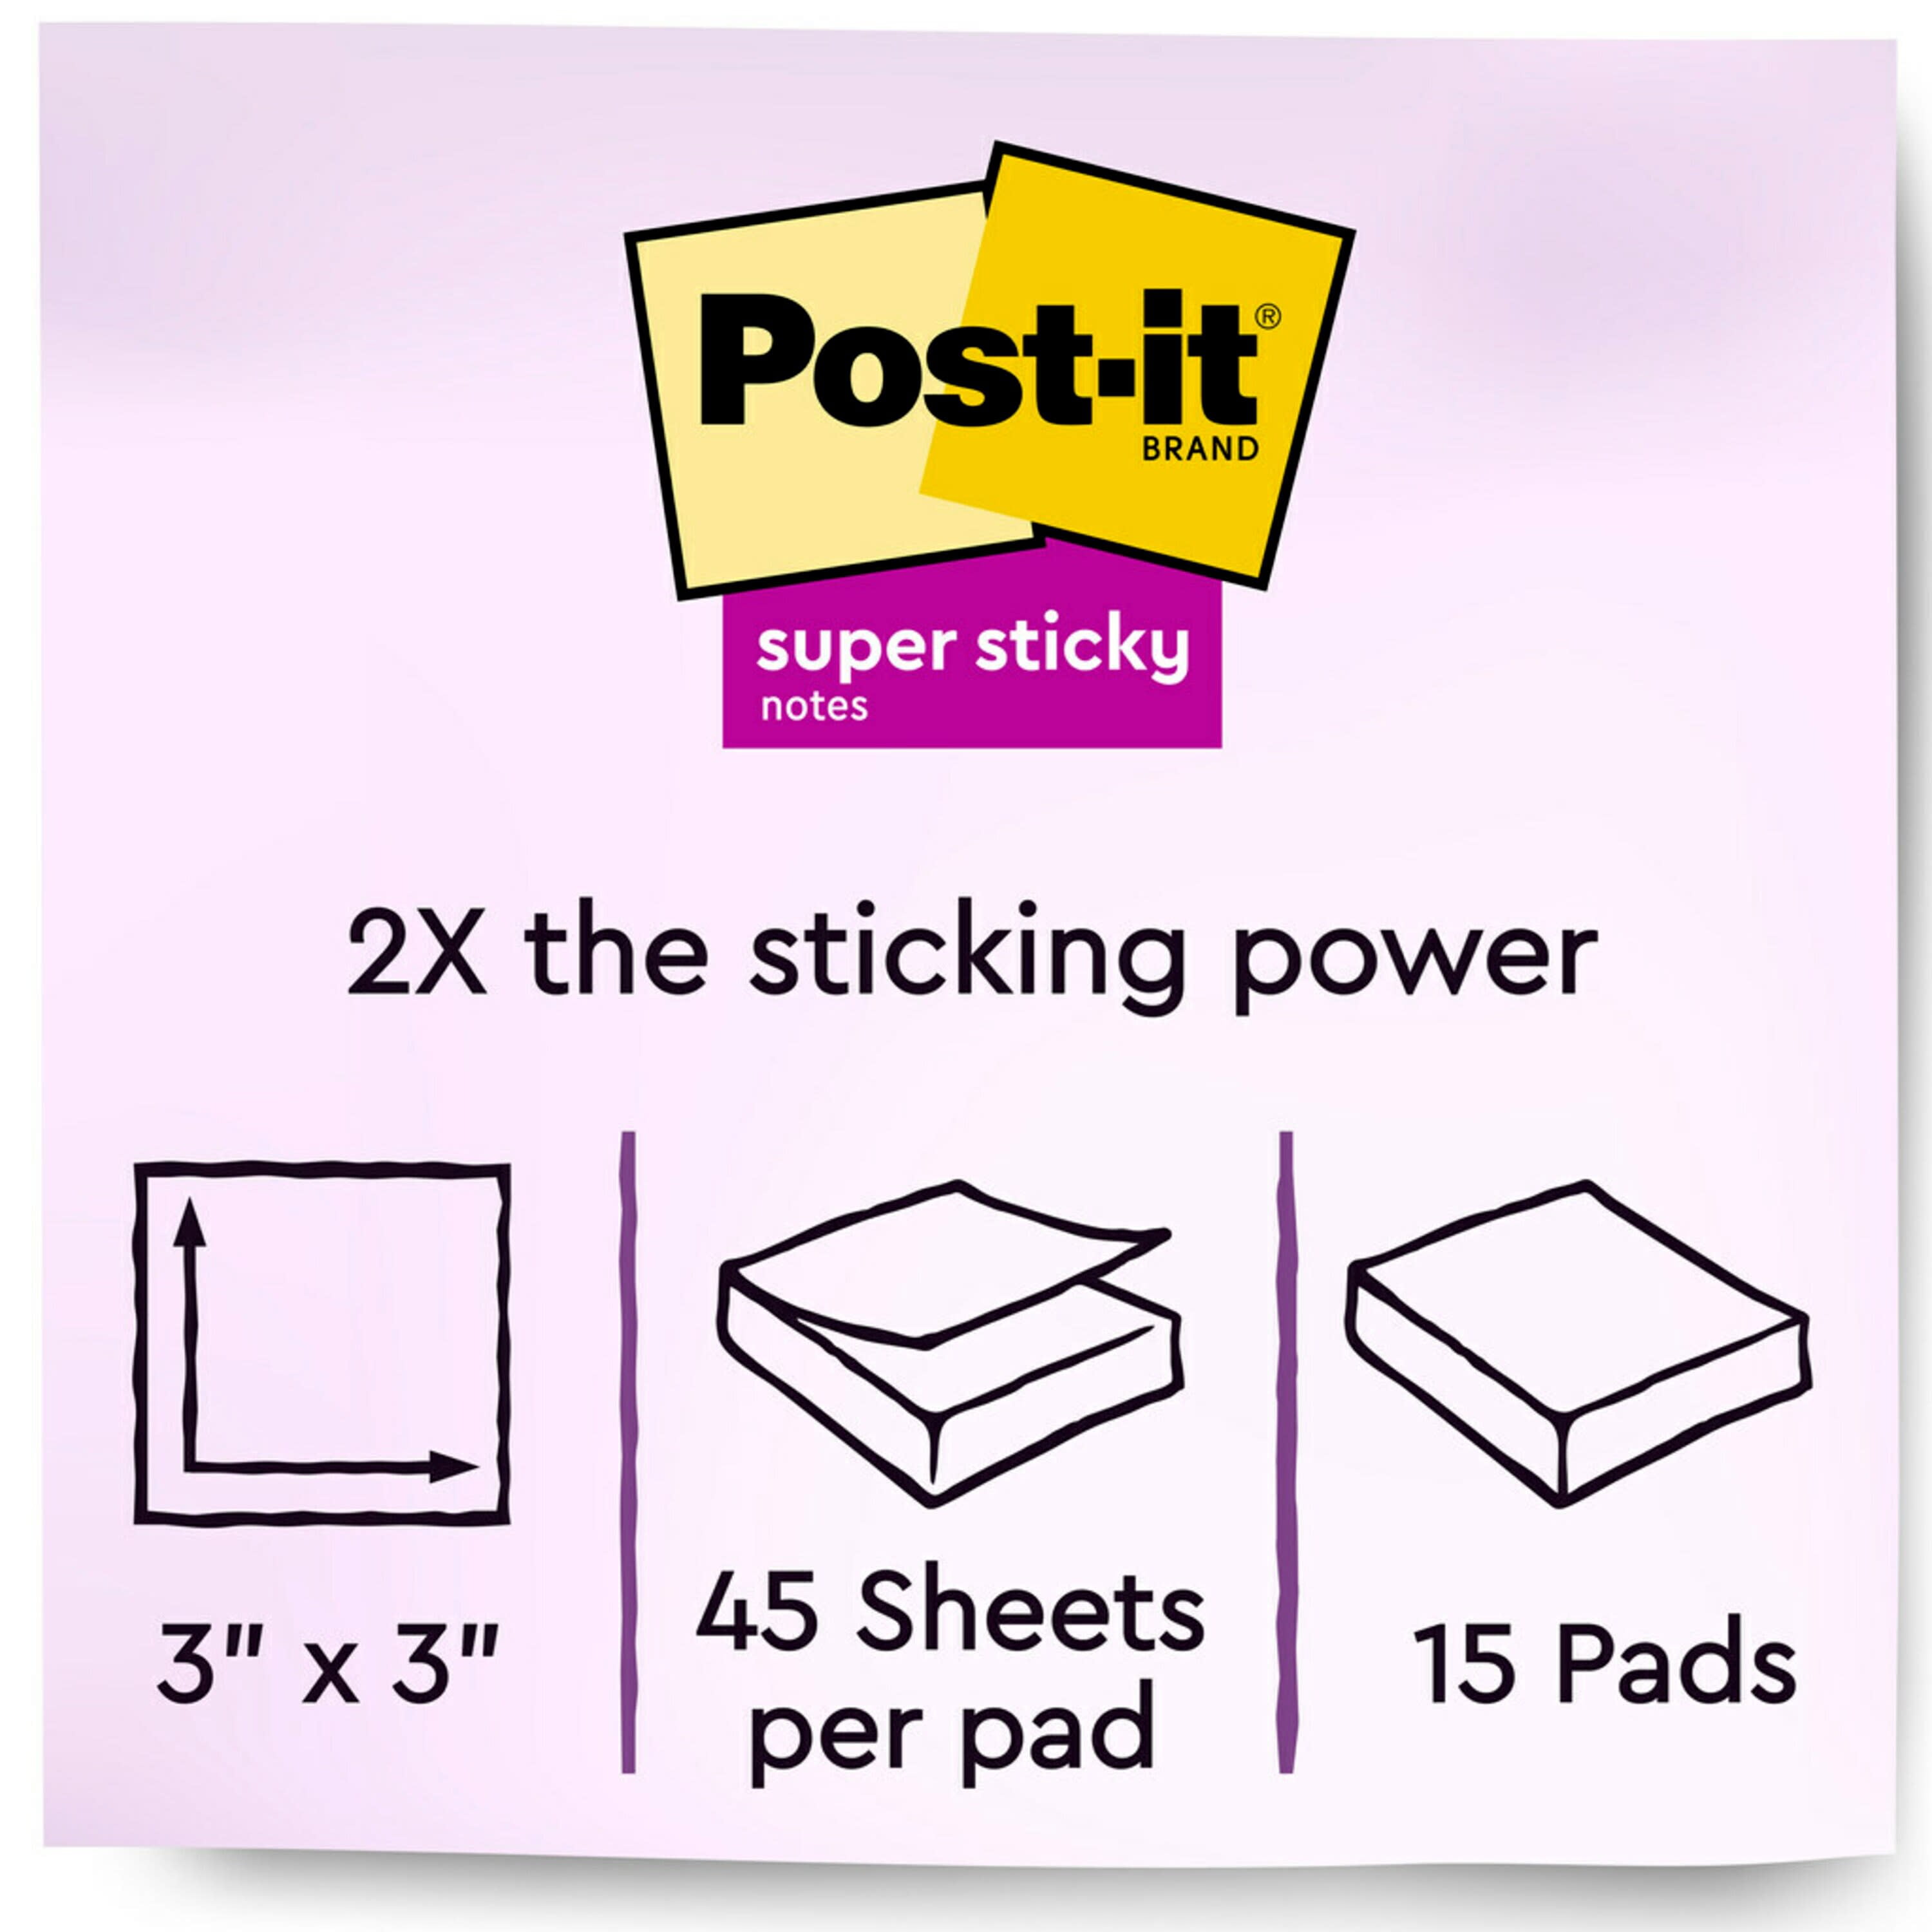 Post-it Notes Super Sticky Neon Lines - 101 x 152 mm - Pack of 3